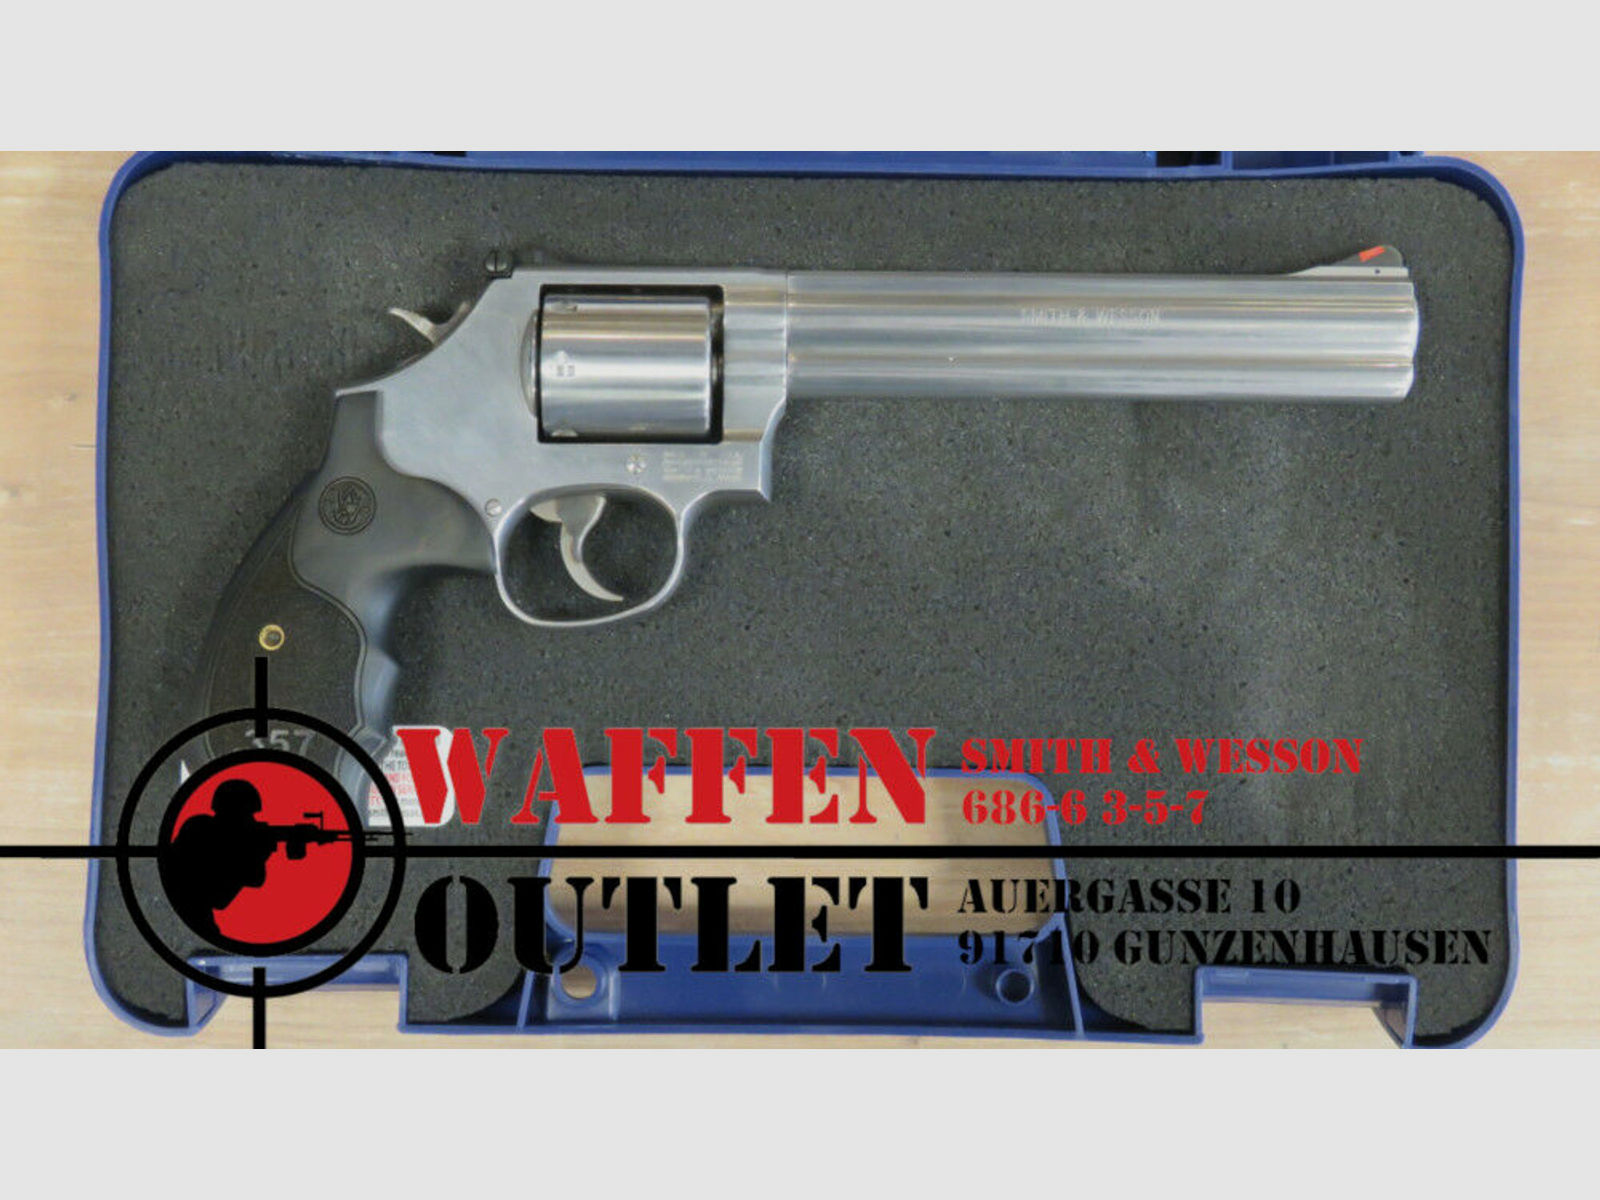 Smith & Wesson	 Model 686-6 3-5-7, 7"